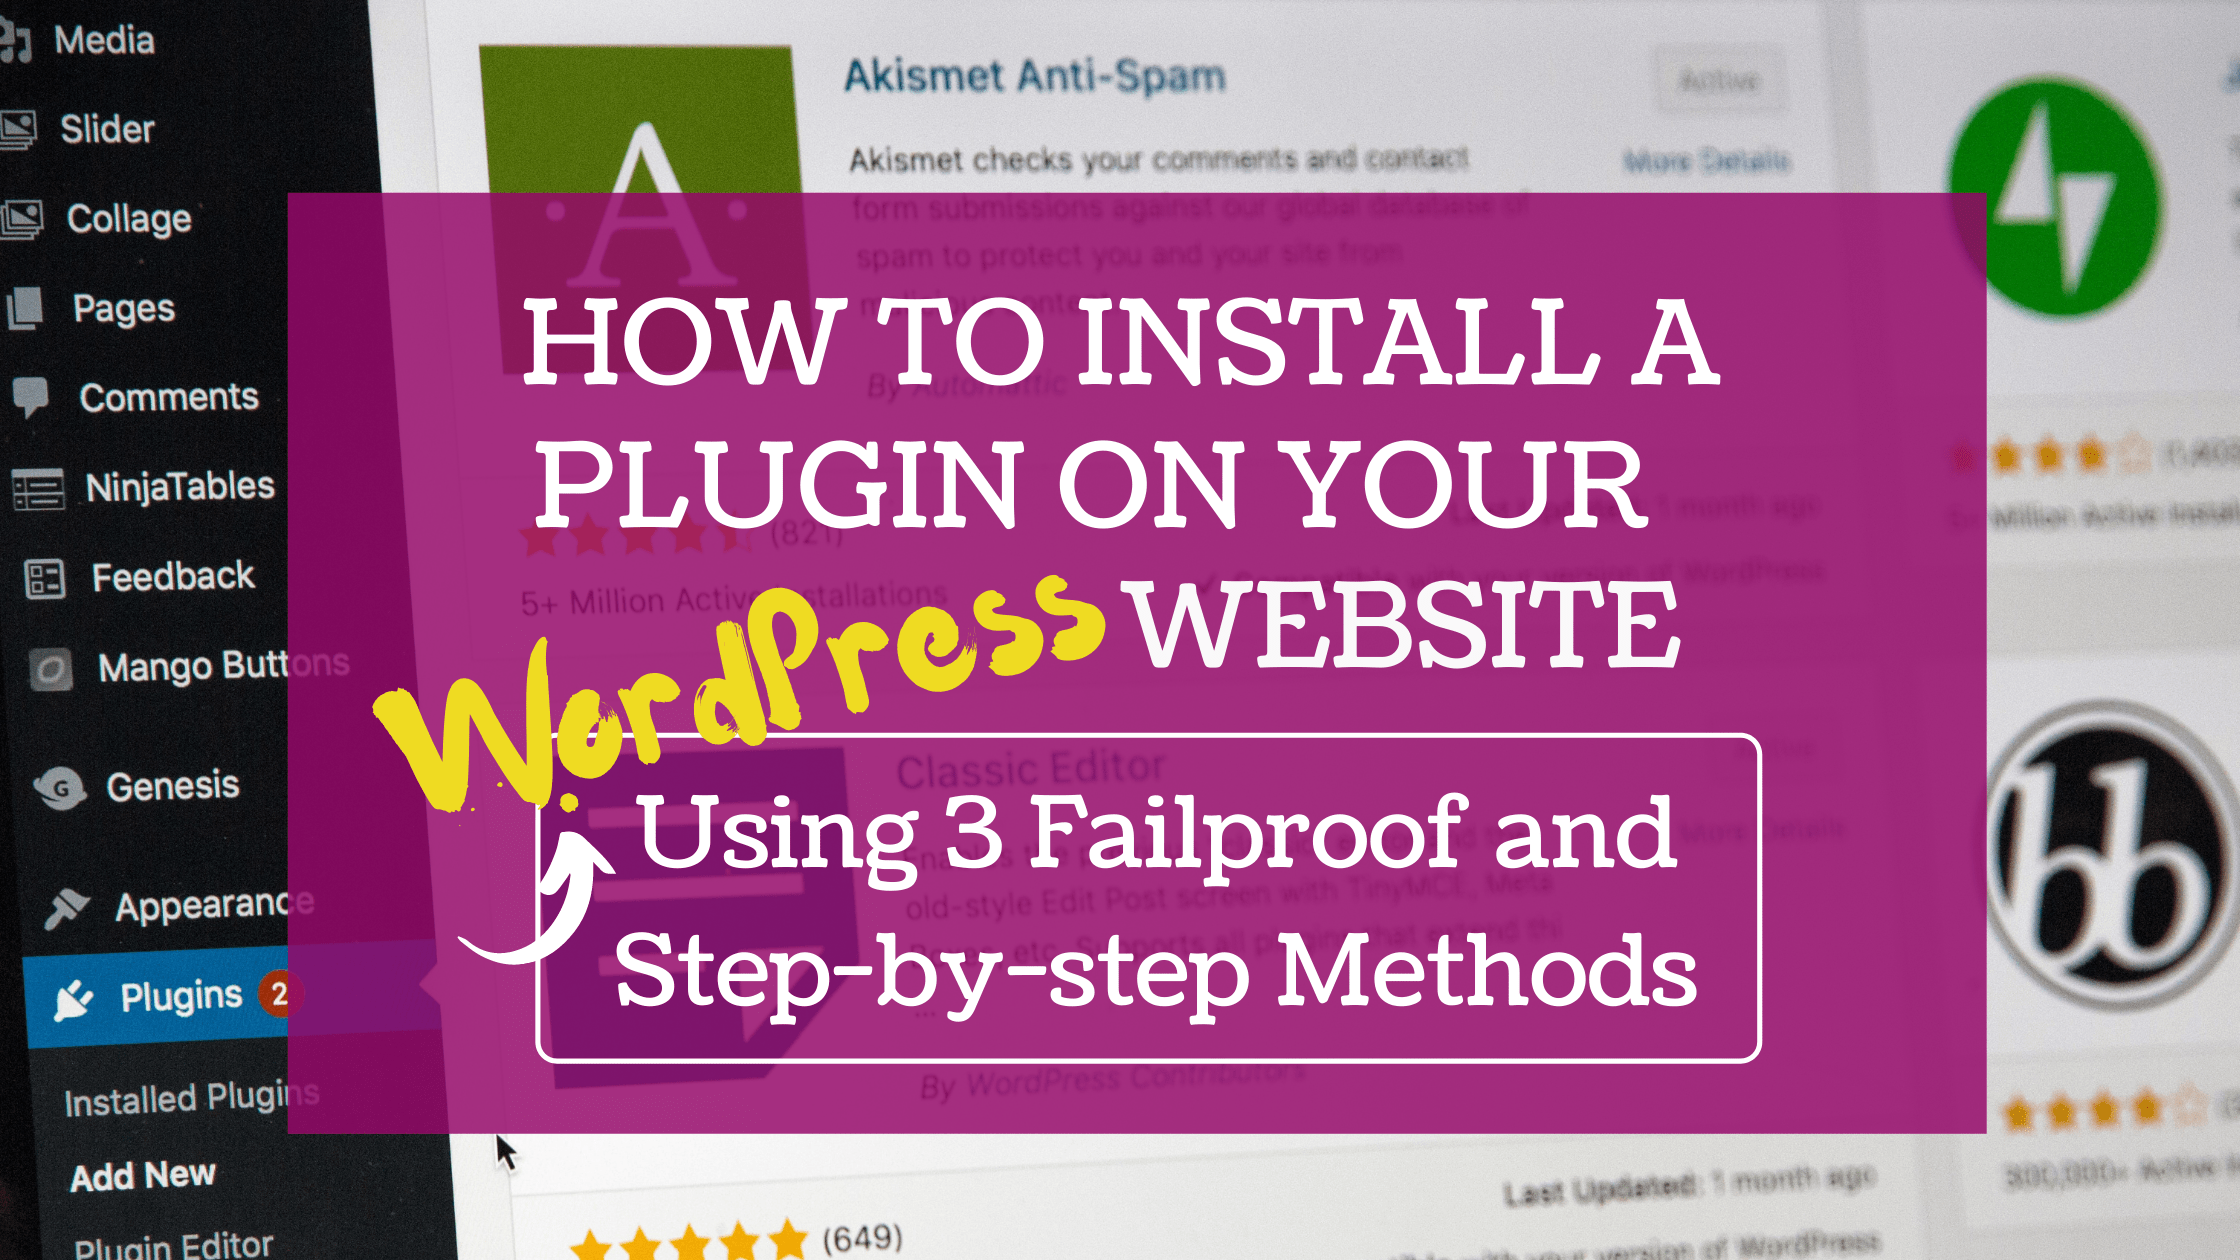 How to Install a Plugin on Your WordPress Website using 3 methods